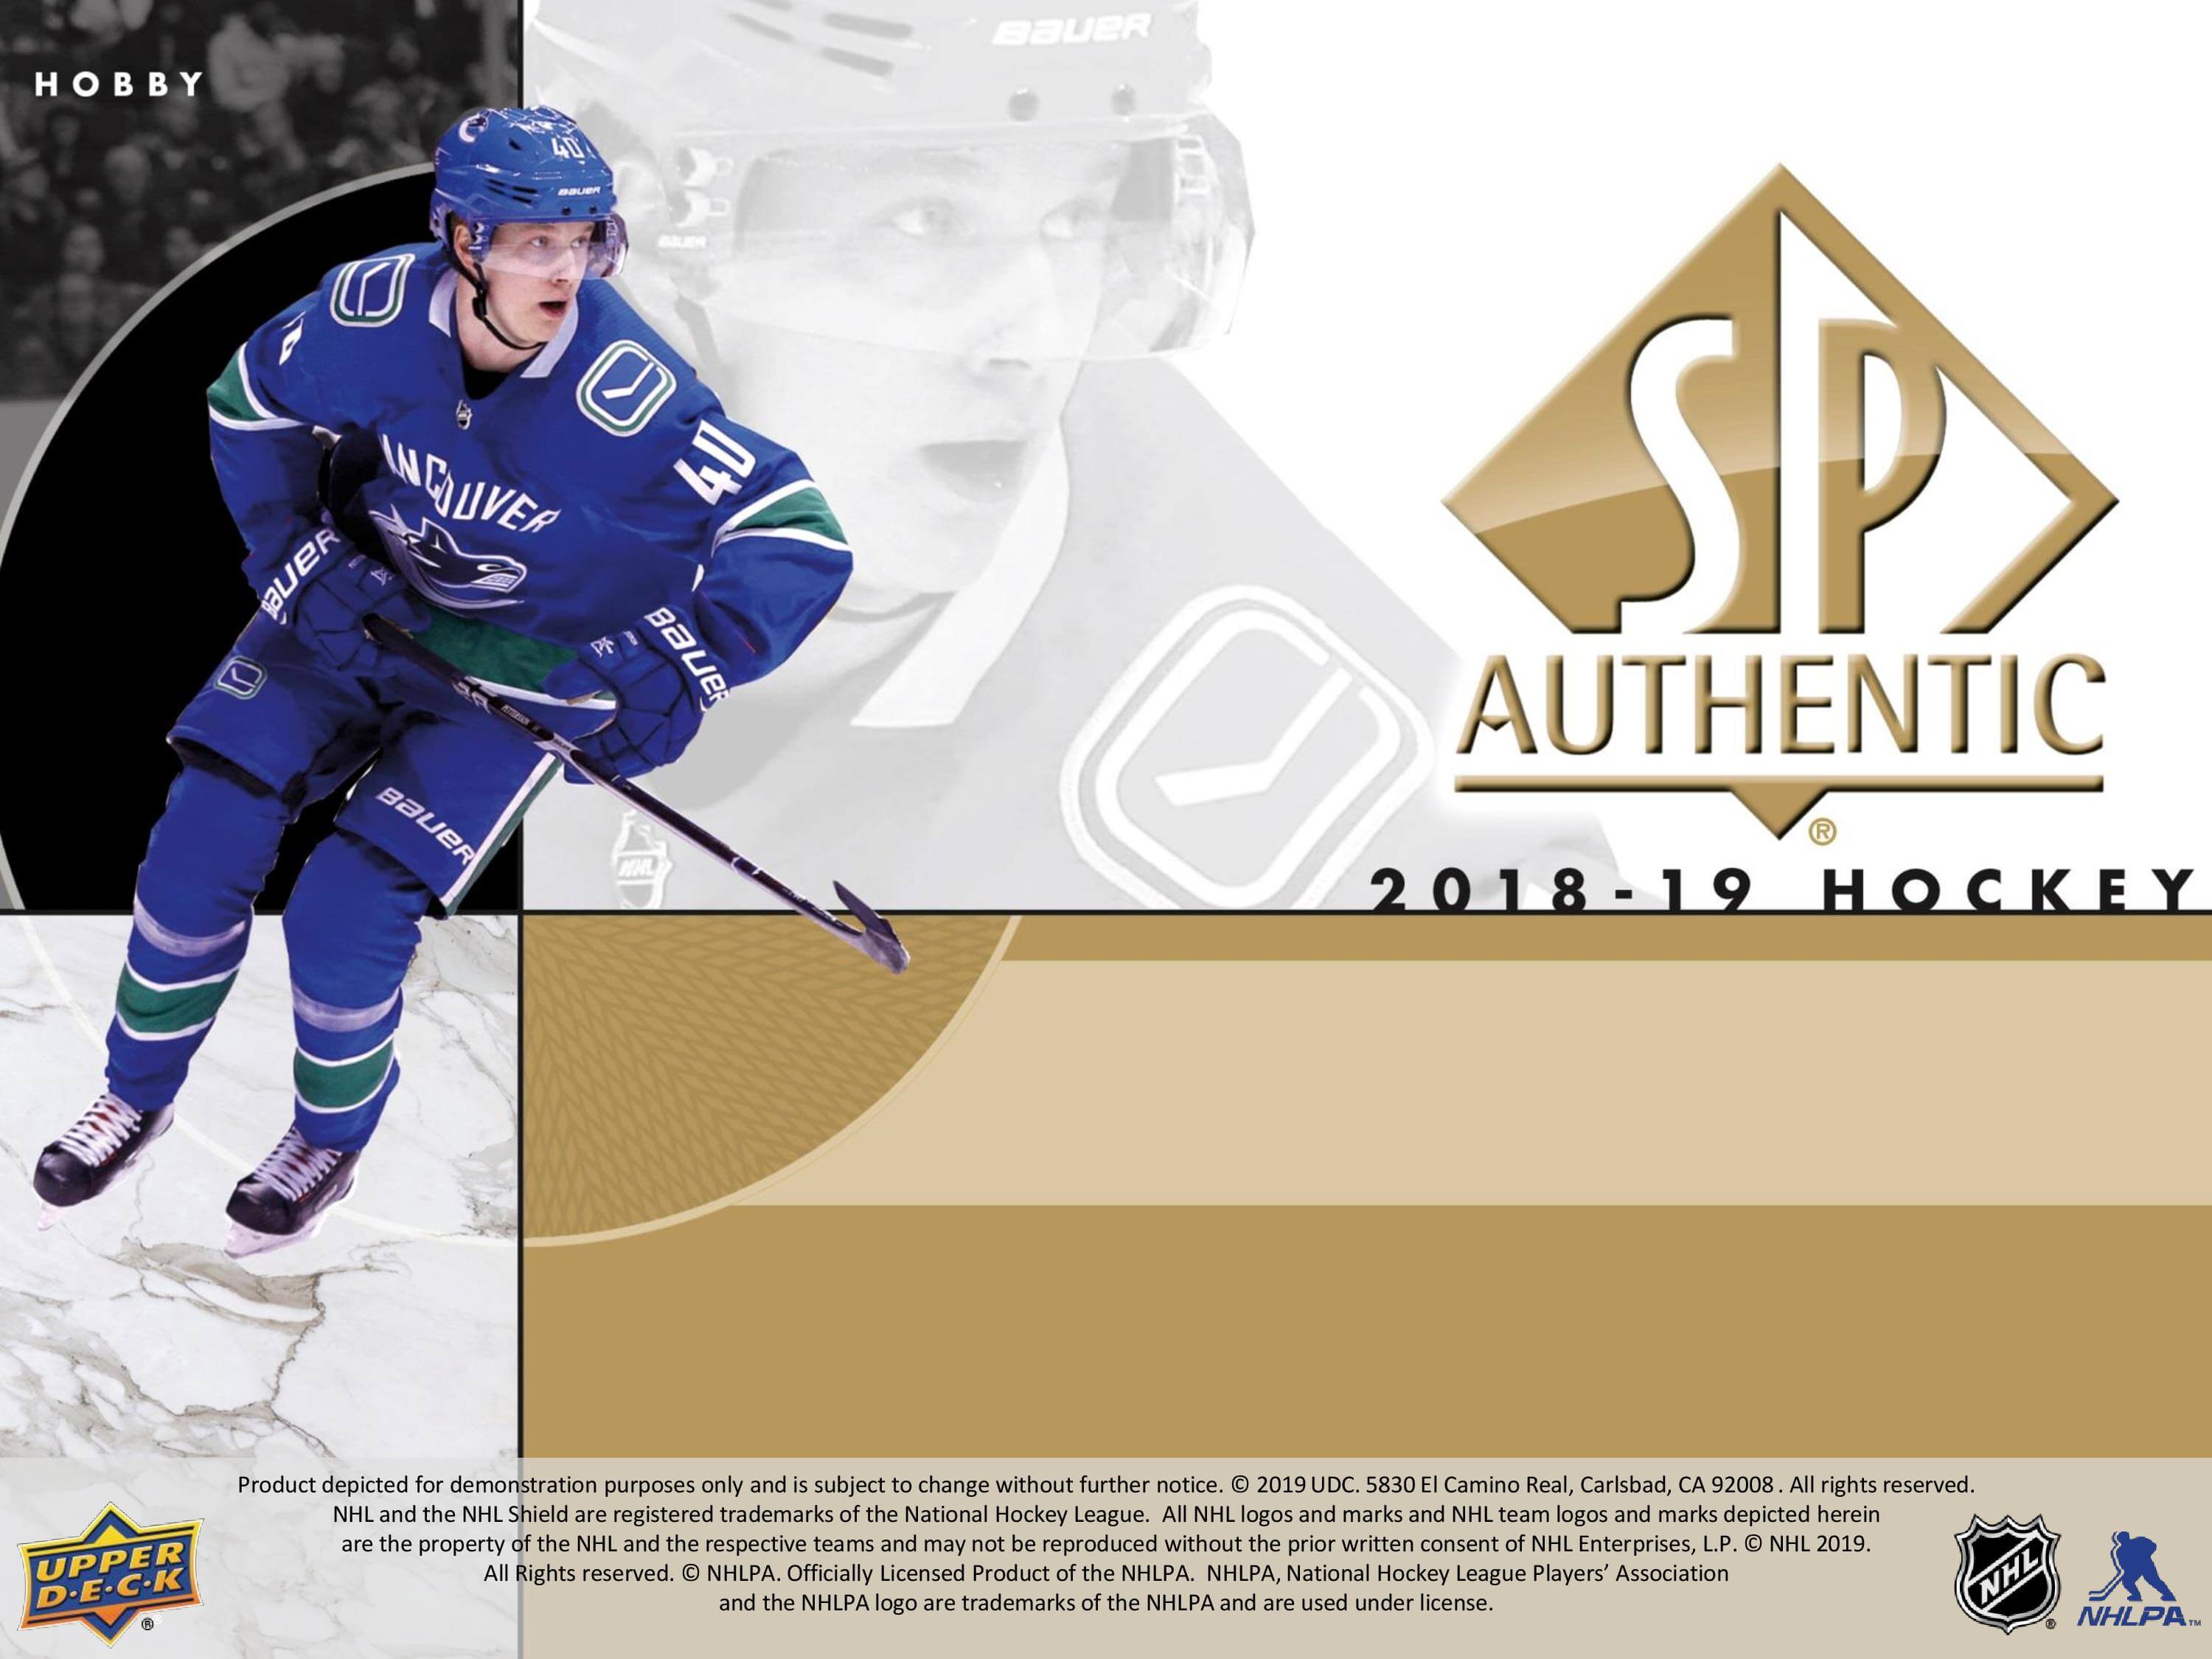 2018-19 Upper Deck SP Authentic Hockey Hobby Pack | Eastridge Sports Cards